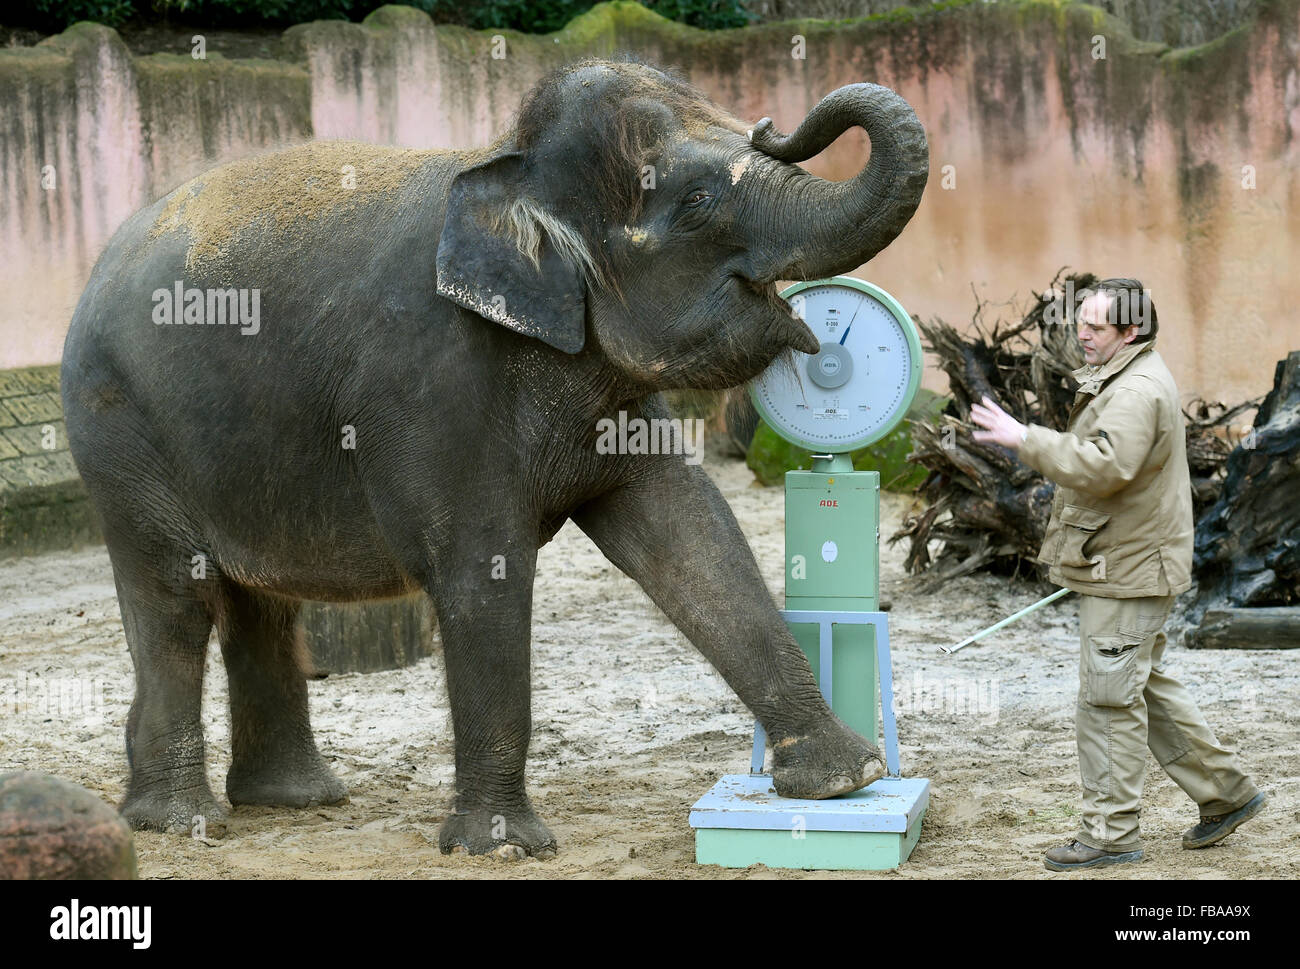 Hanover, Germany. 13th Jan, 2016. Zookeeper Juergen Kruse 'weighs' Asian elephant Manari at the adventure zoo in Hanover, Germany, 13 January 2016. Manari weighs 2,700 kilograms. 2,061 animals of 198 species live in the Hanover Zoo, according to this year's inventory. Photo: HOLGER HOLLEMANN/dpa/Alamy Live News Stock Photo